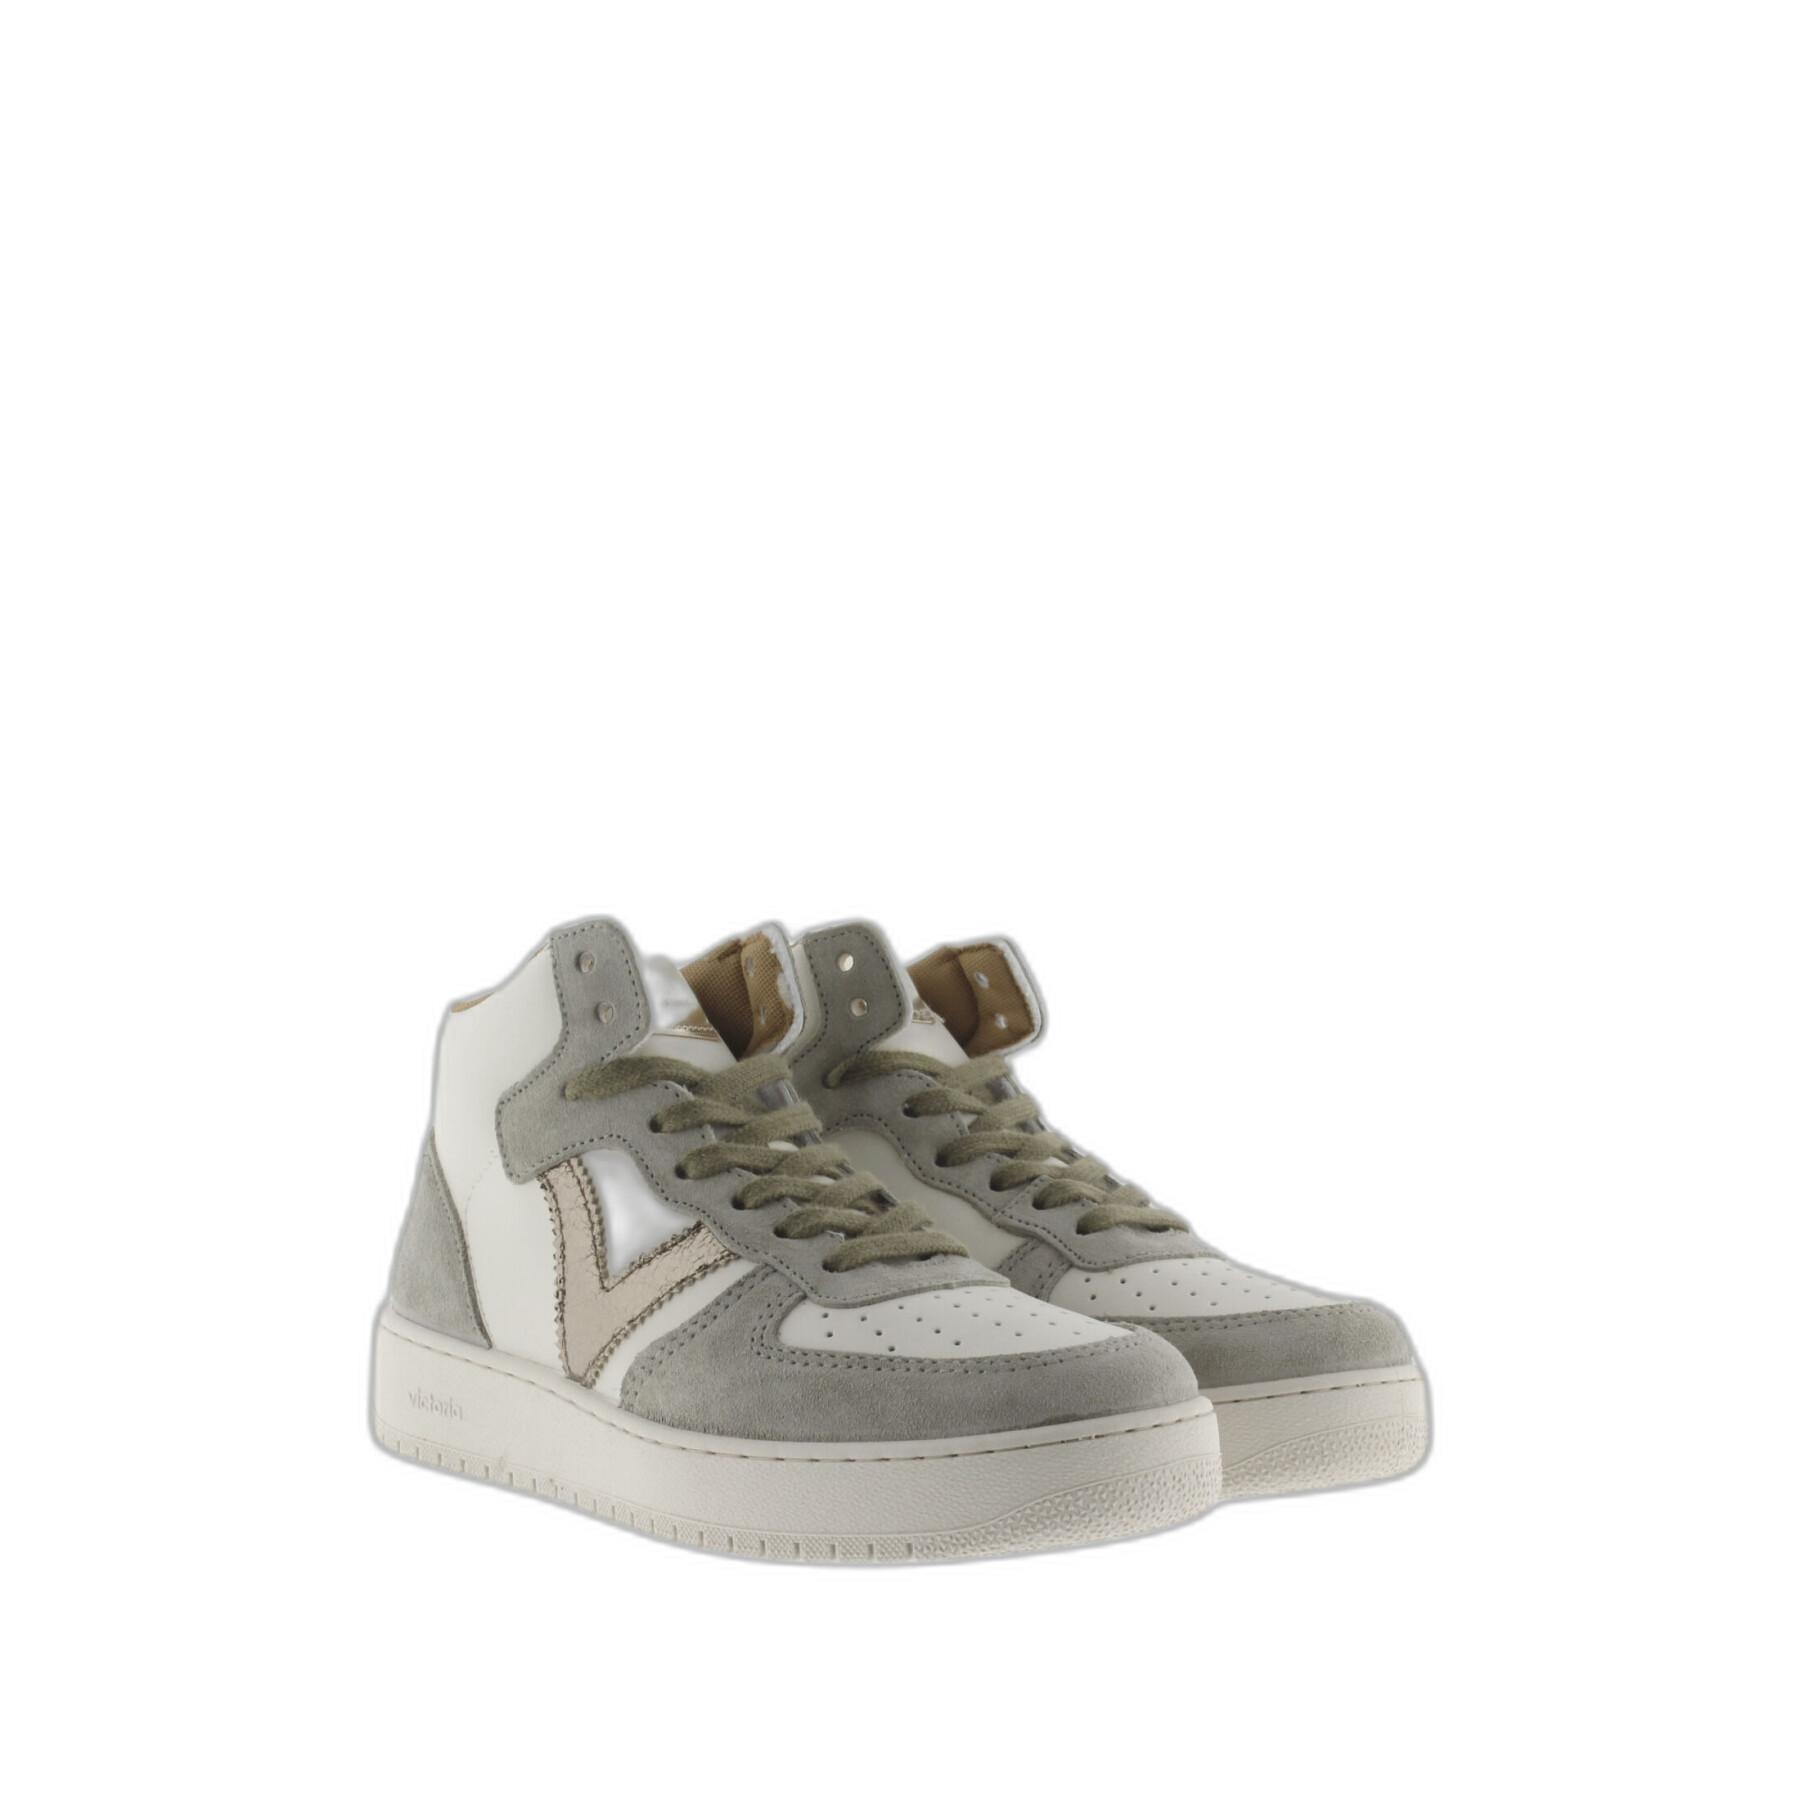 Split leather sneakers with metallic effect Victoria Madrid